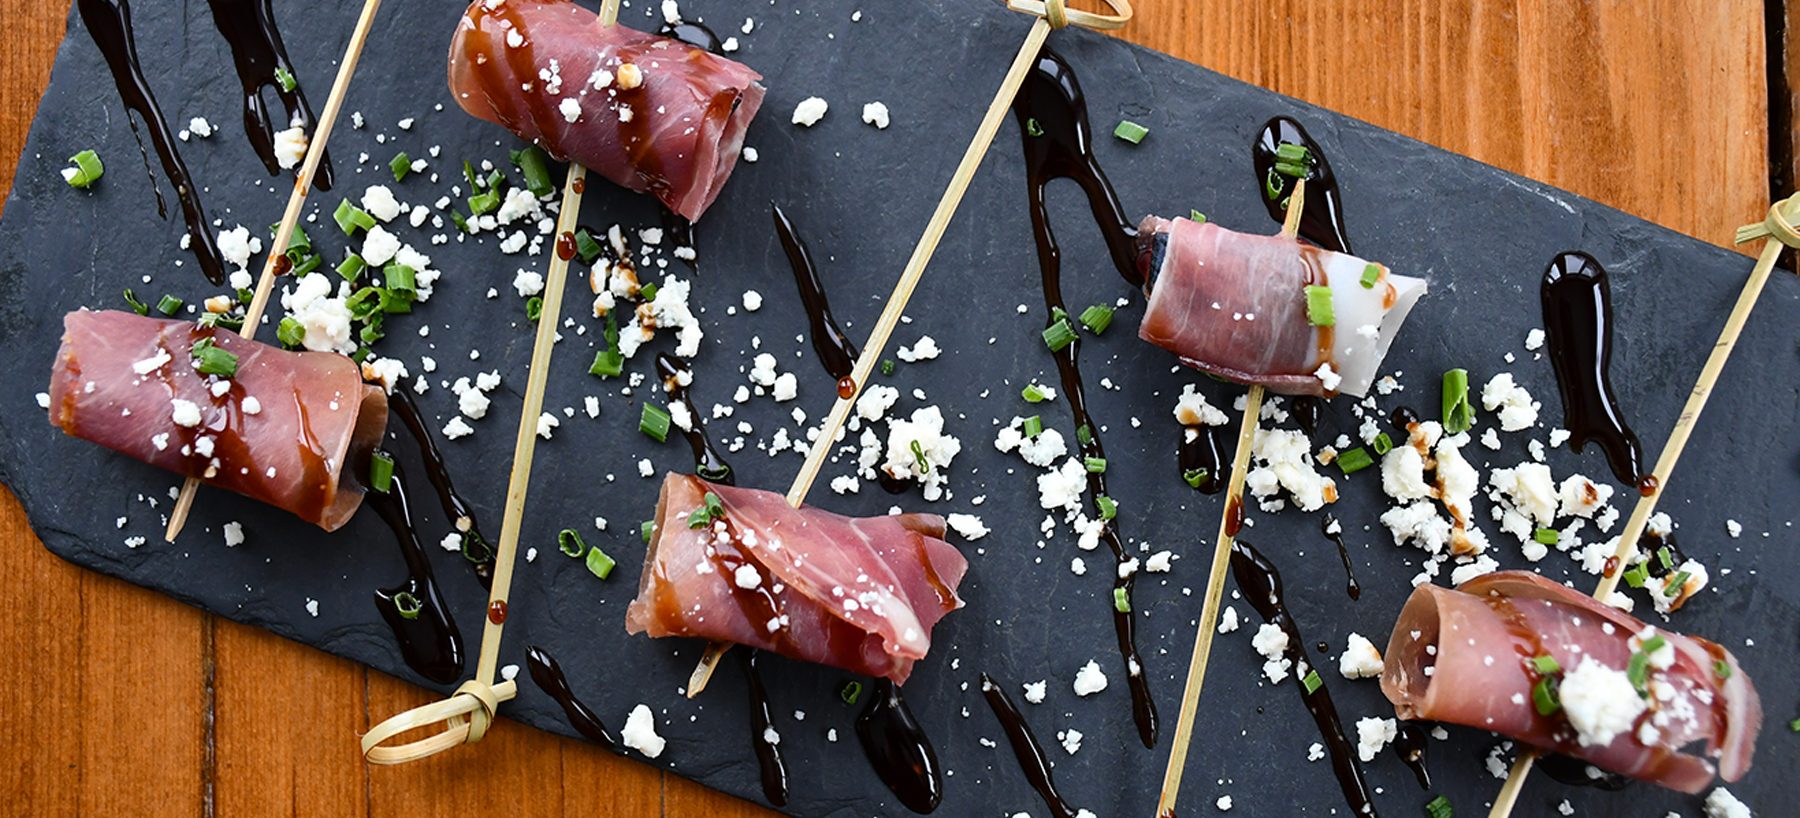 Prosciutto skewers with feta and balsamic vinegar